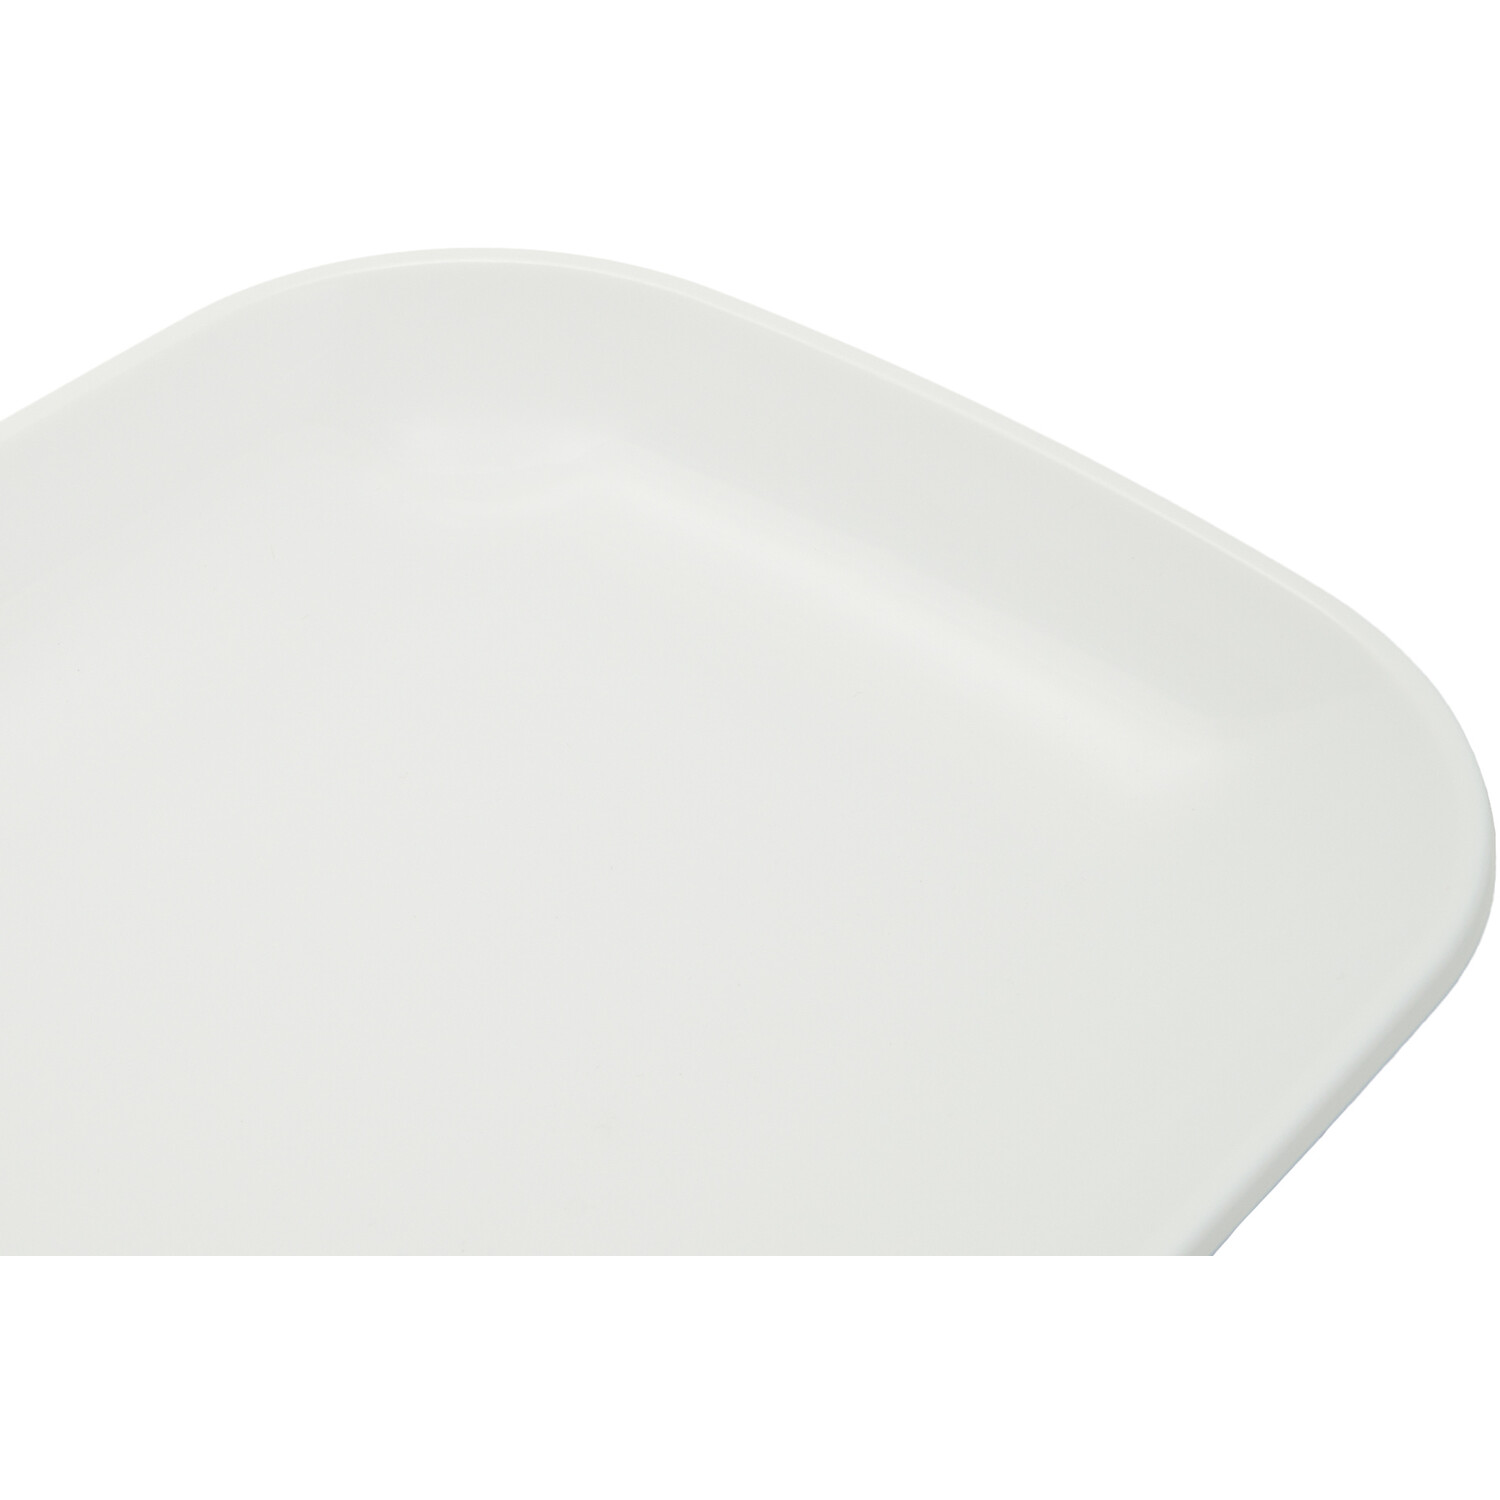 Pack of 2 Long Rectangle Serving Platters - White Image 3